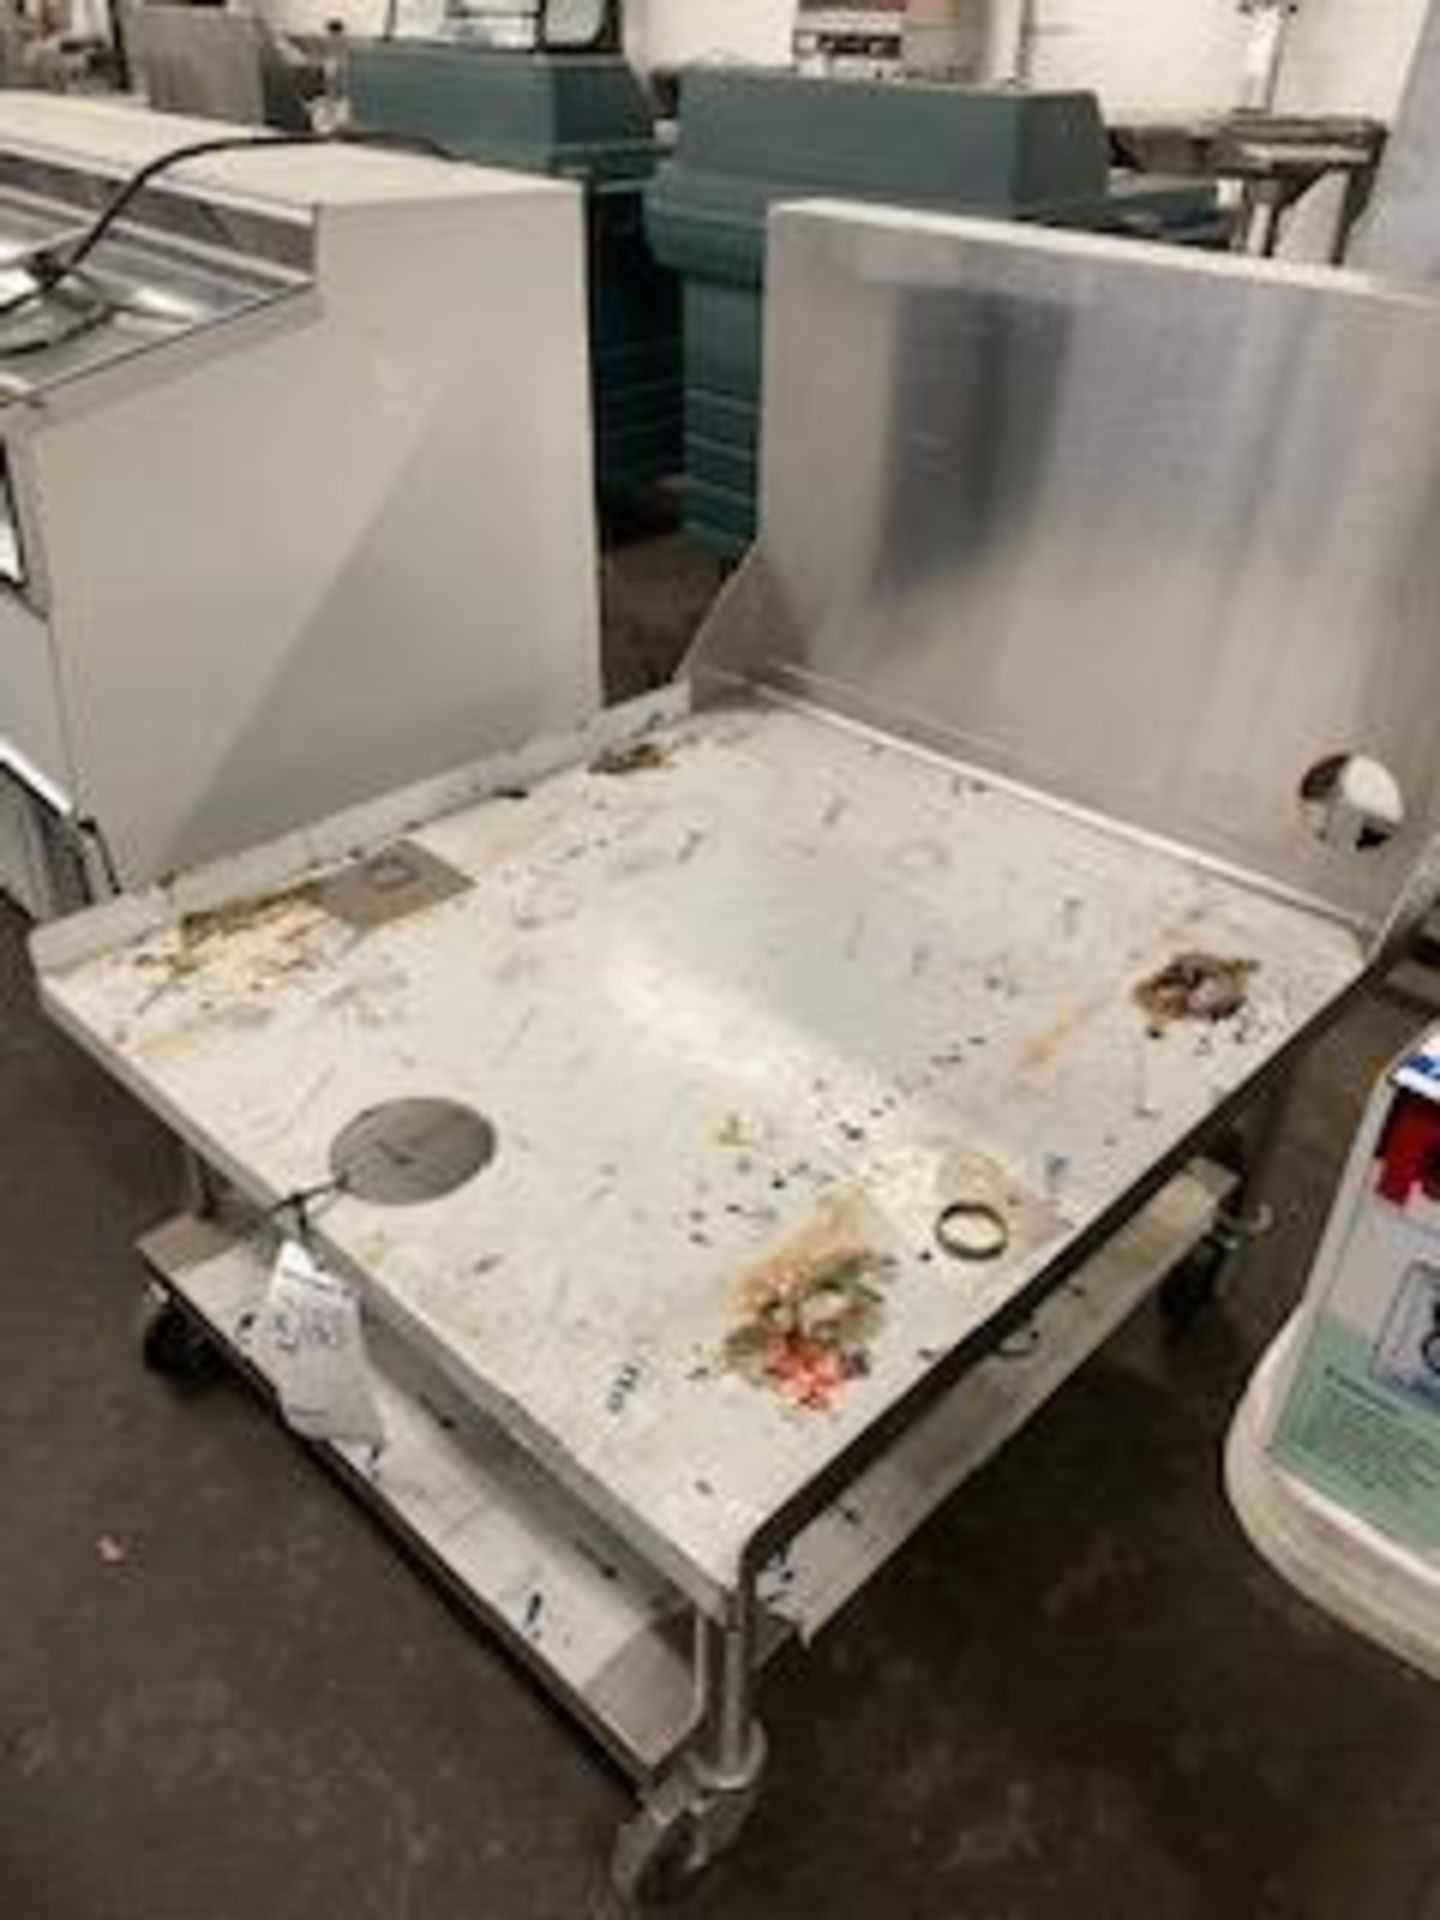 Equipment grill stand